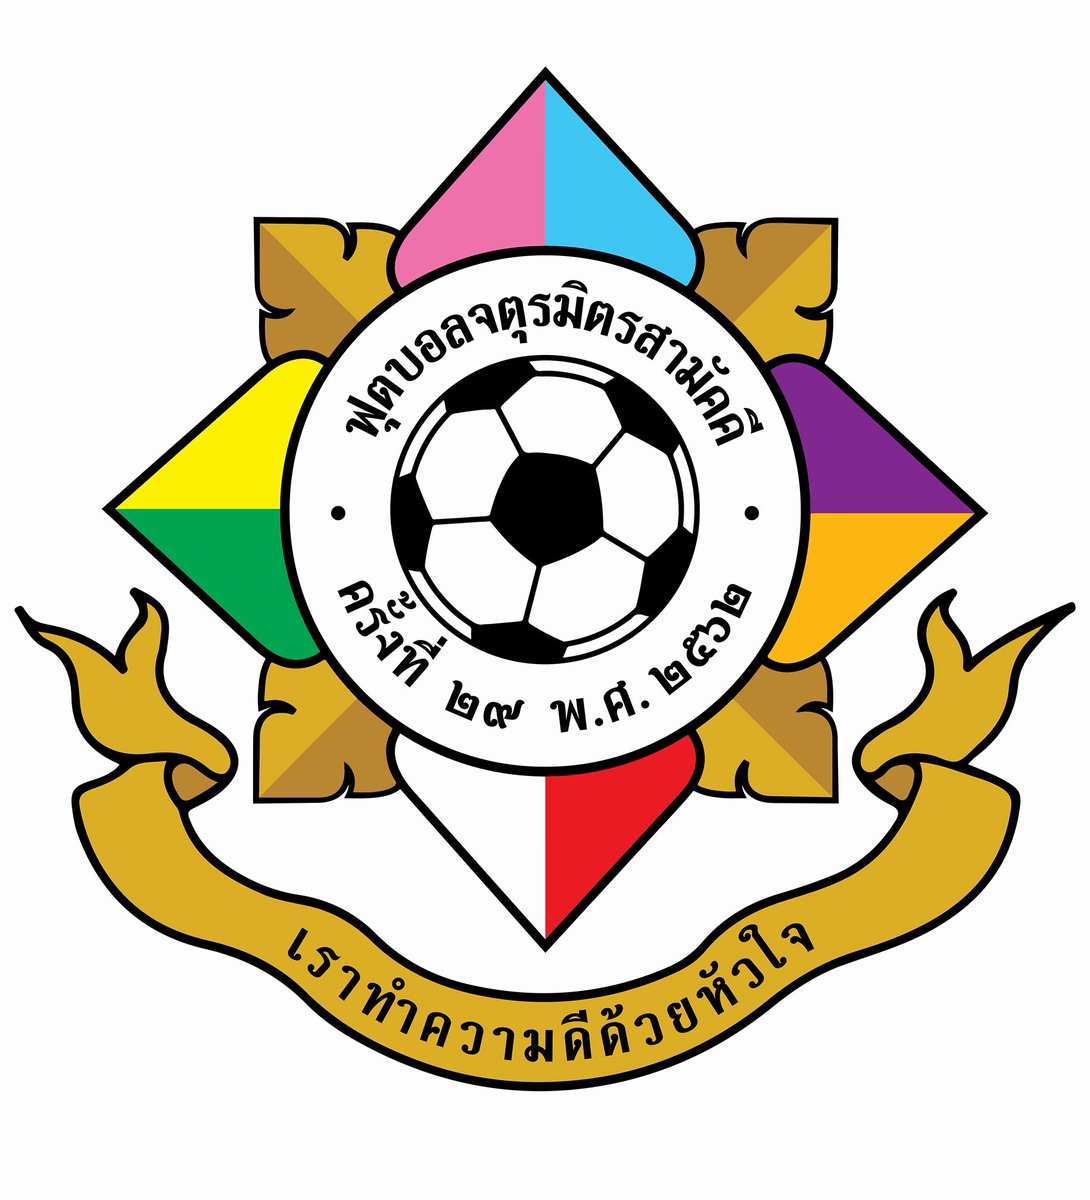 Assumption College is one of four schools which participates in "Jaturamitr Samakkee", a traditional football match by the four oldest boys' schools in Thailand: Suankularb Wittayalai School, Debsirin School, Bangkok Christian College and Assumption College. (13)